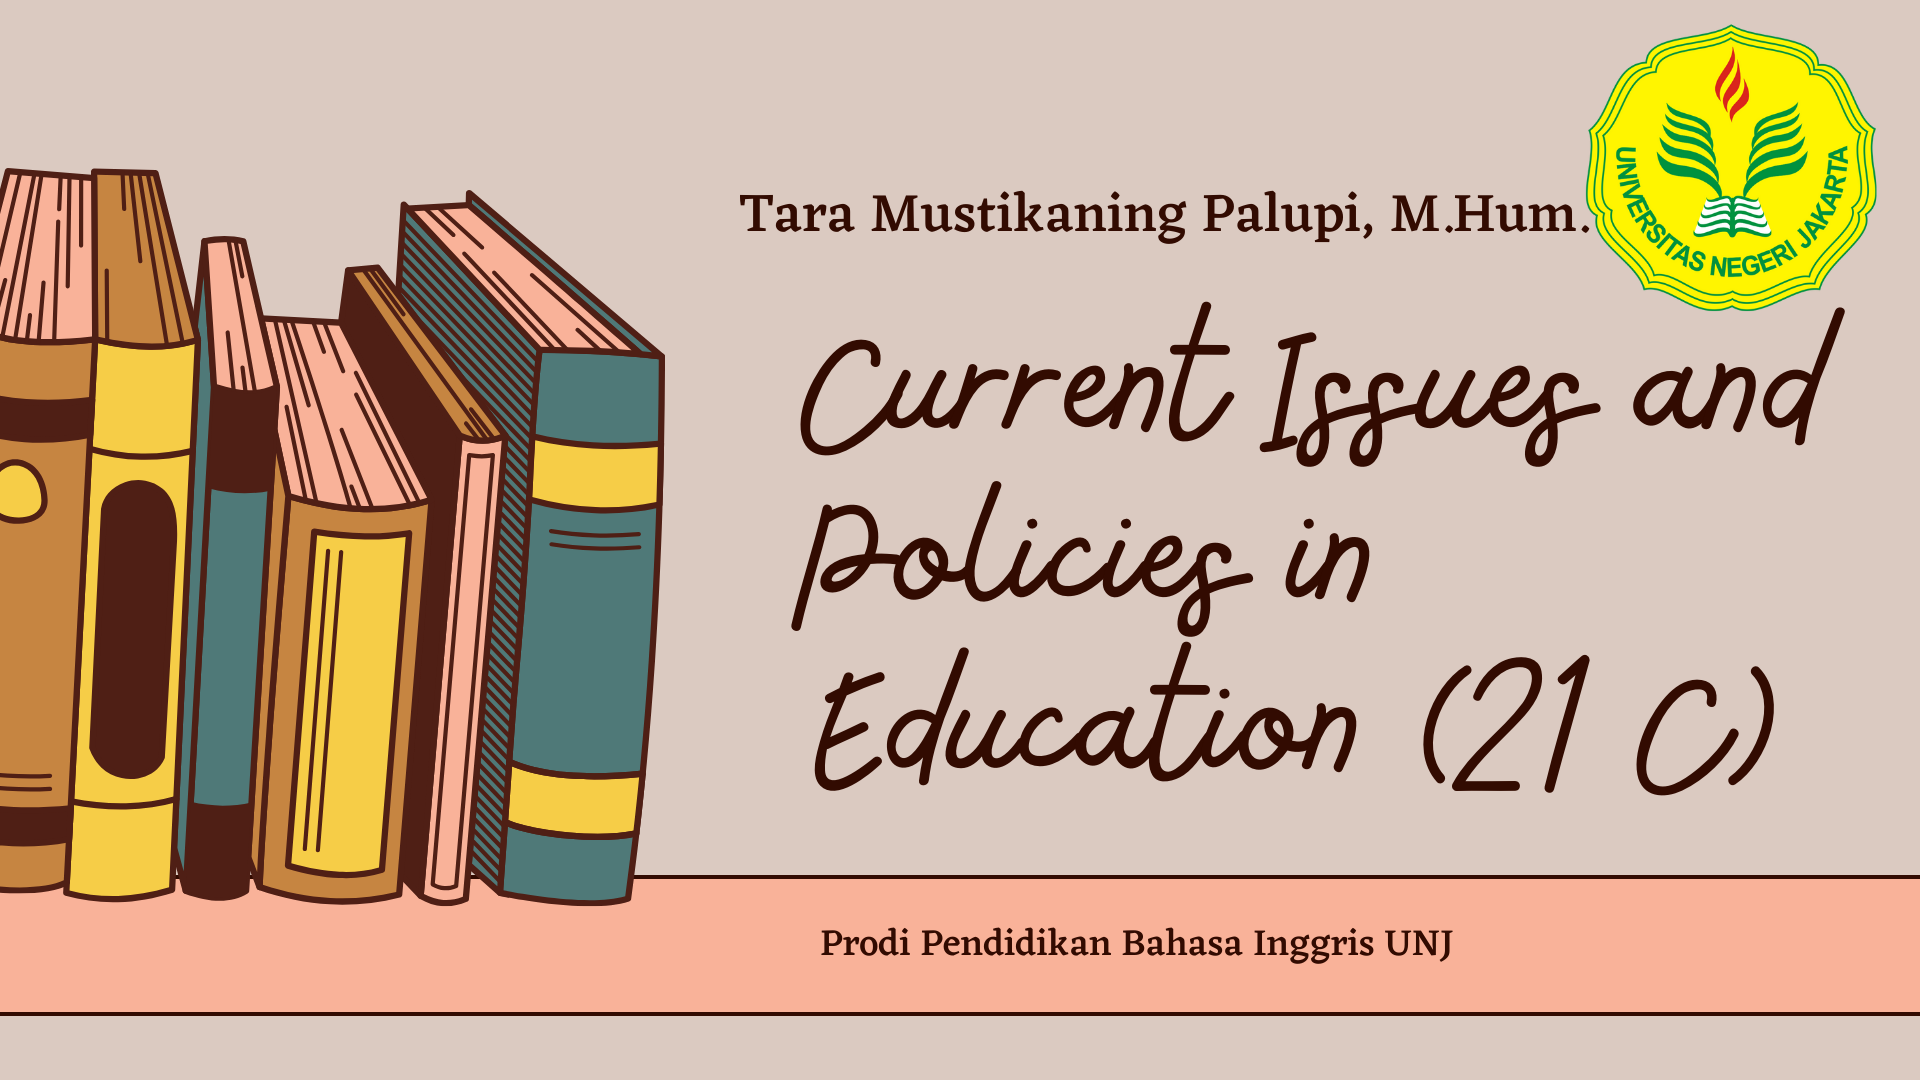 Current Issues and Policies in Education (120-21 C)